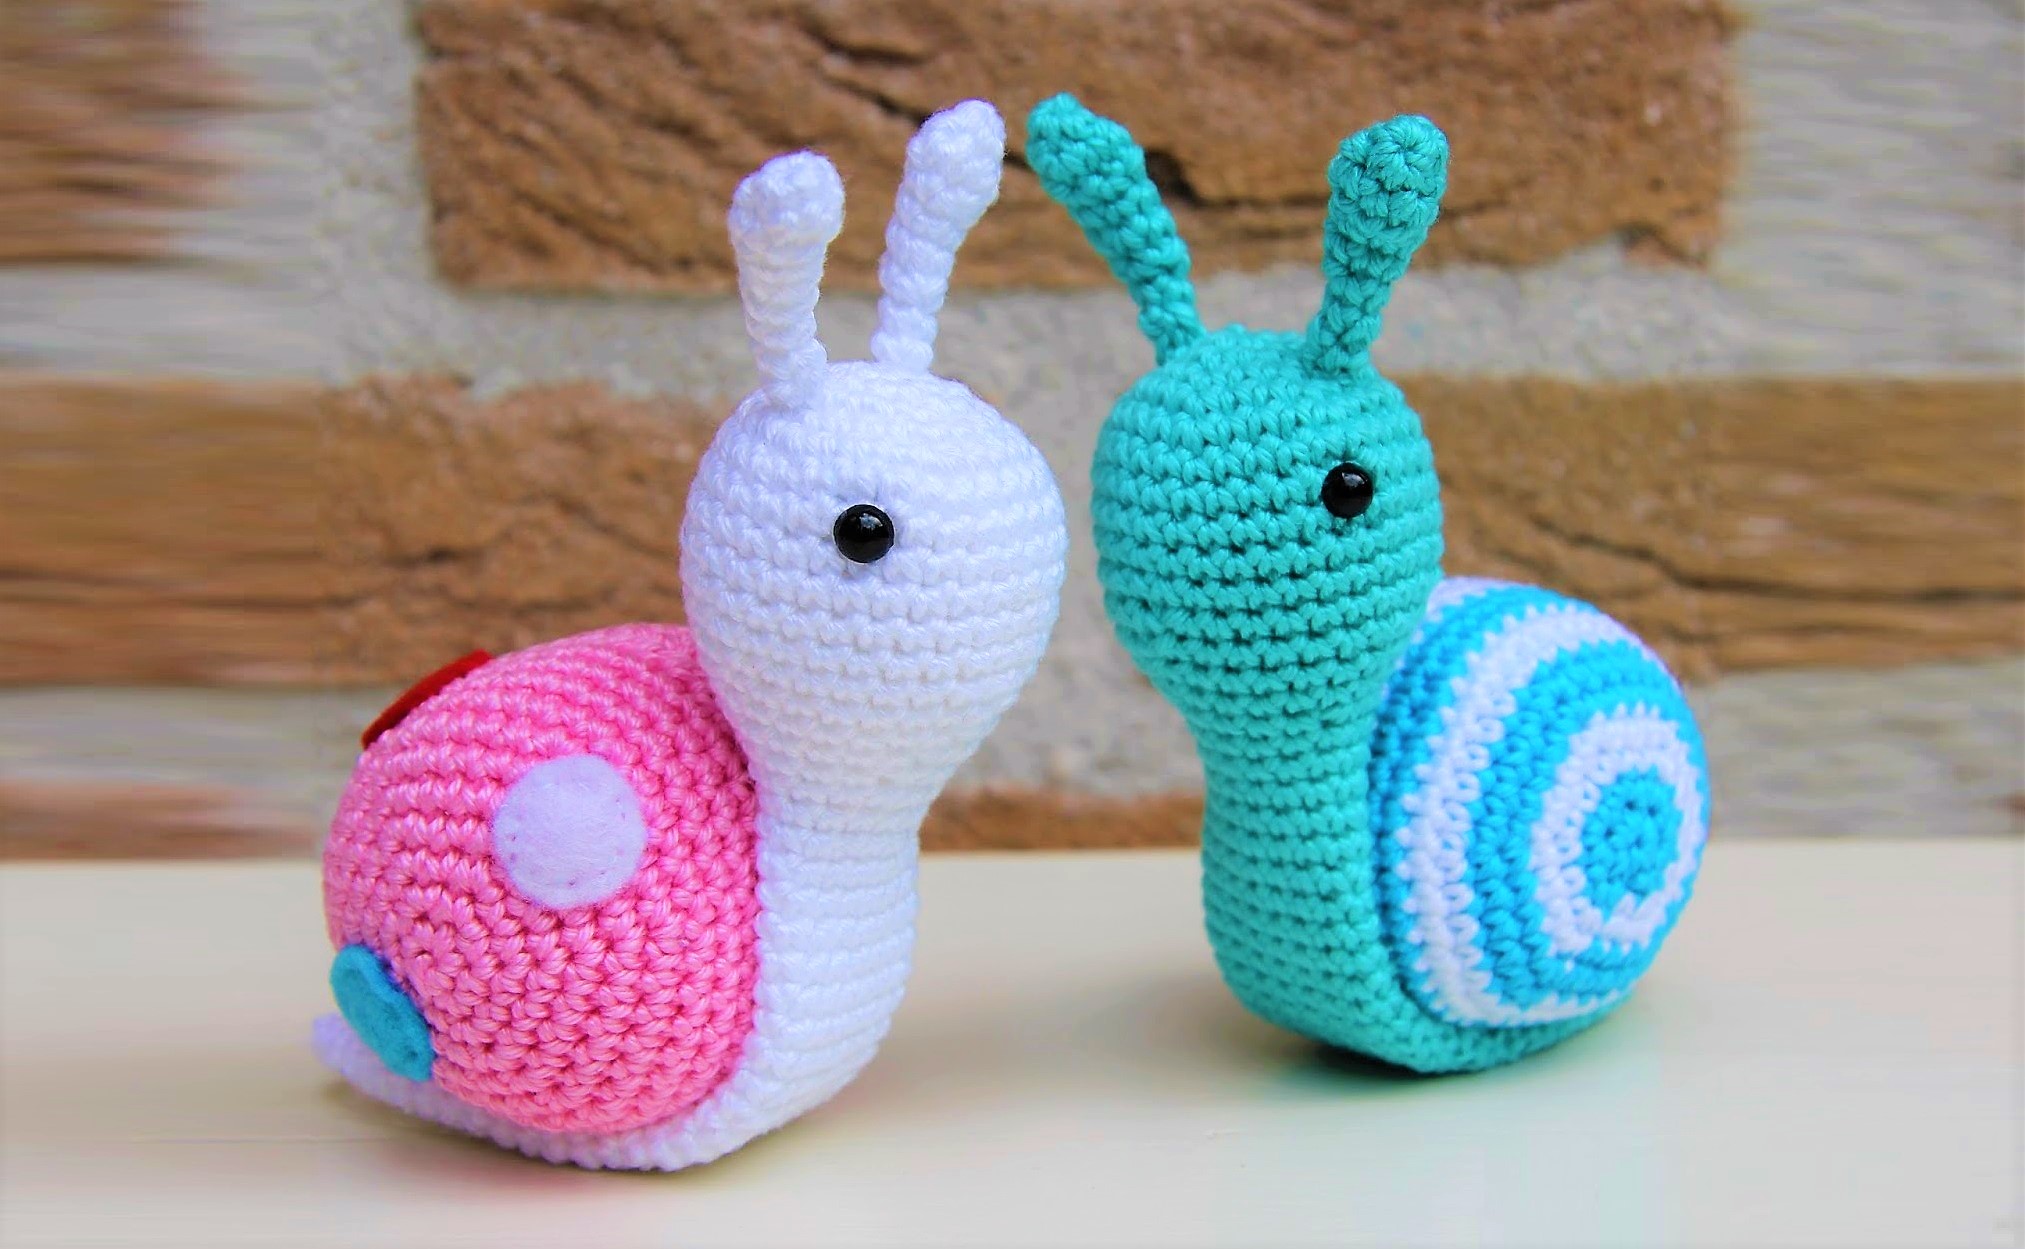 Crochet a Creative Snail to Use as a Pincushion or Toy (Free Pattern)